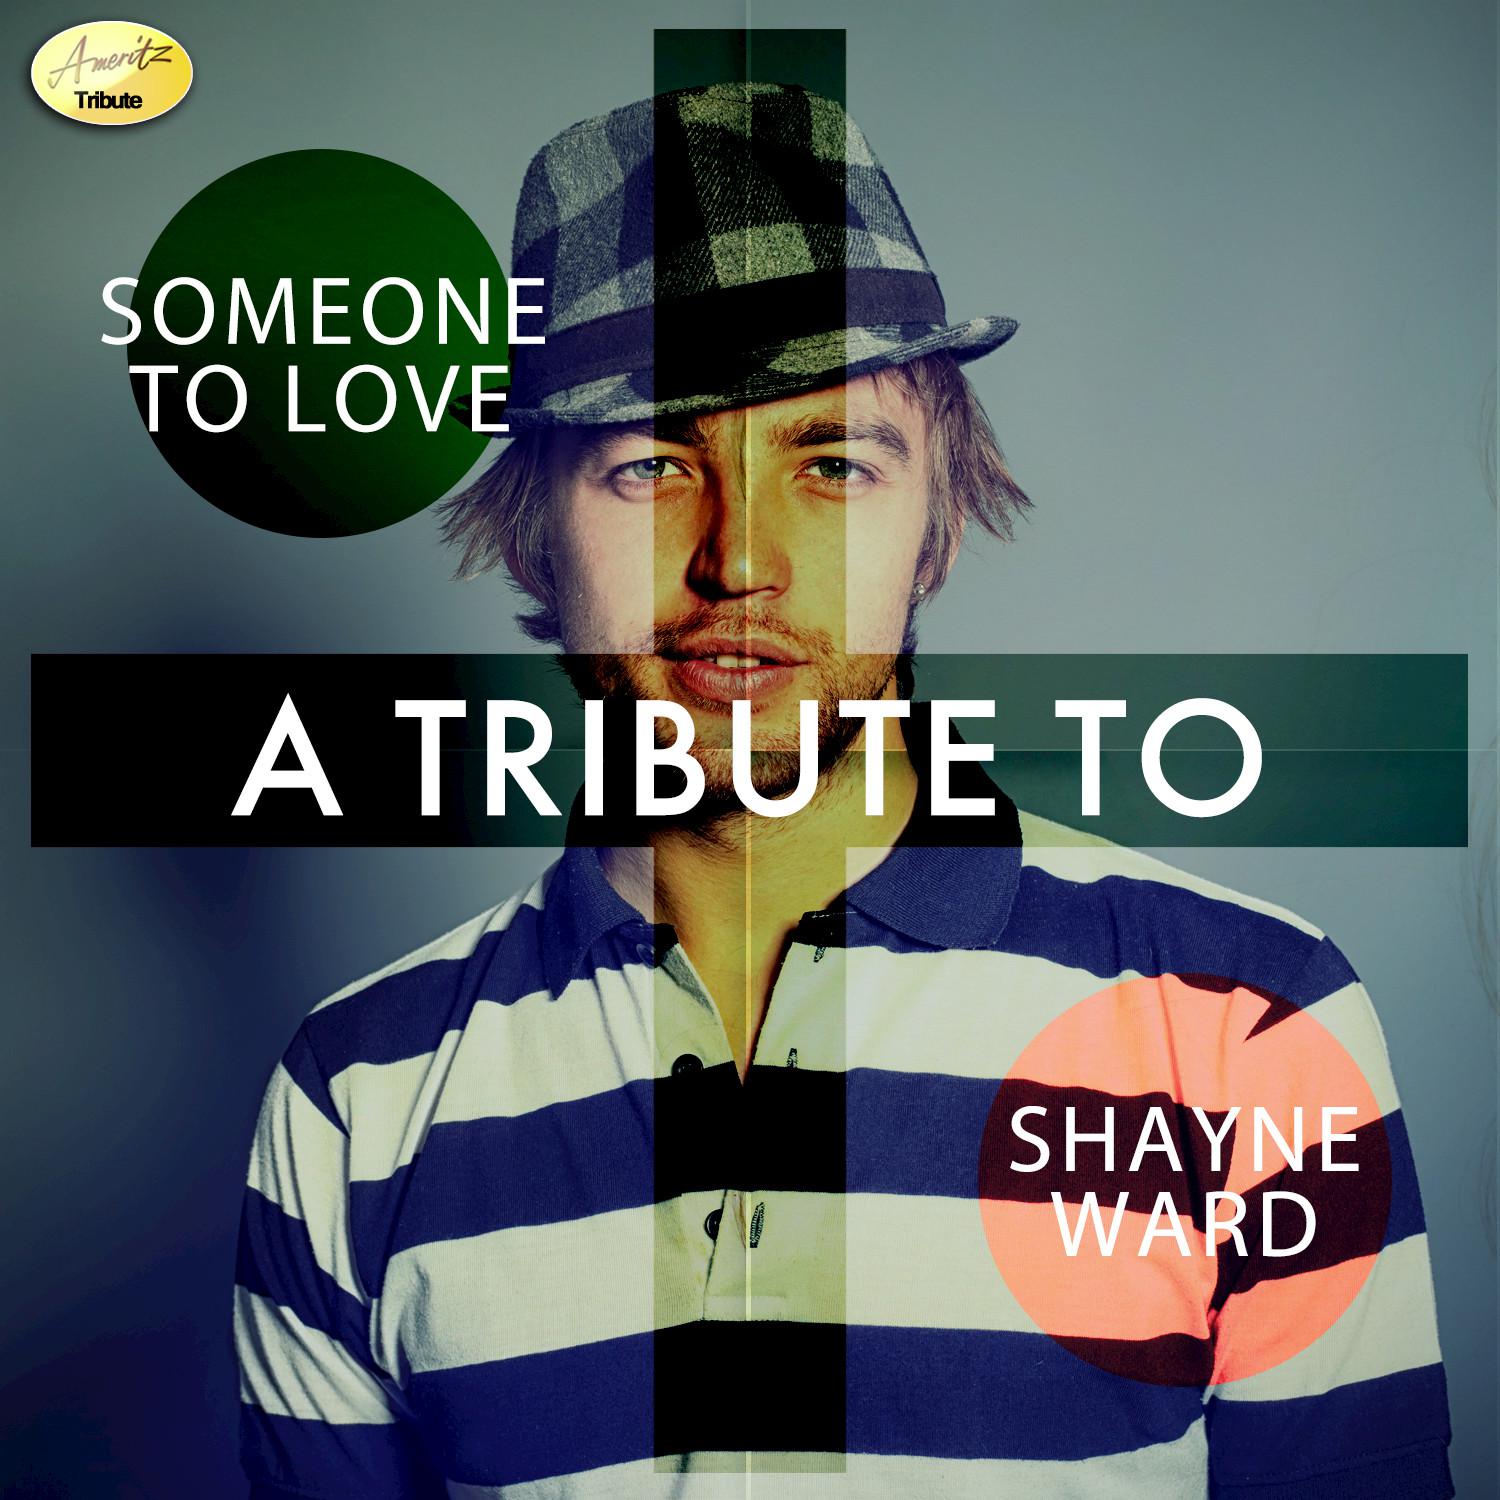 Someone to Love - A Tribute to Shayne Ward